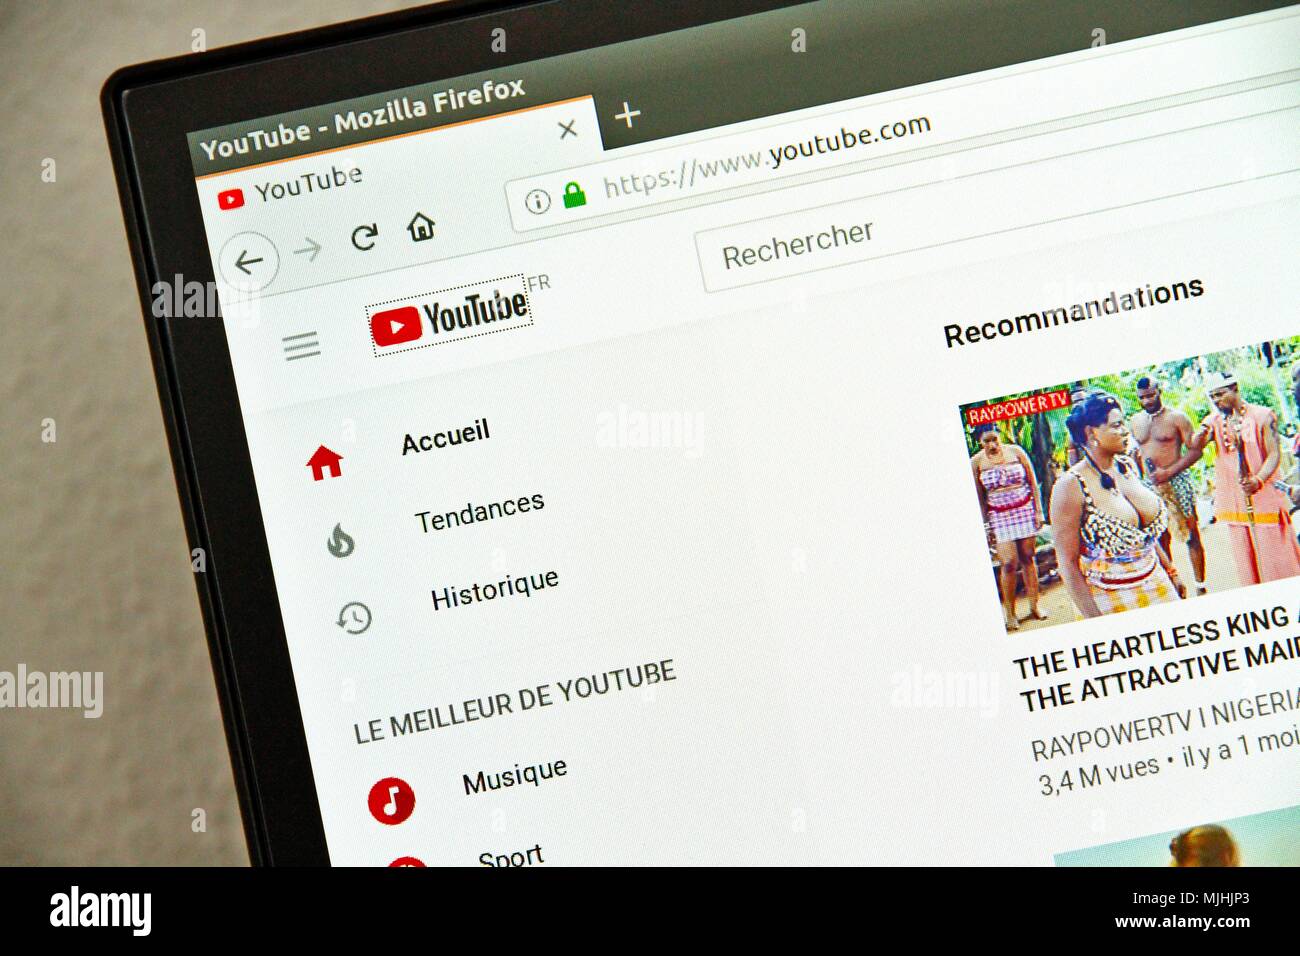 YouTube website, a video hosting site where users can send, evaluate, watch, comment and share videos. It was created in February 2005 by Steve Chen. Stock Photo